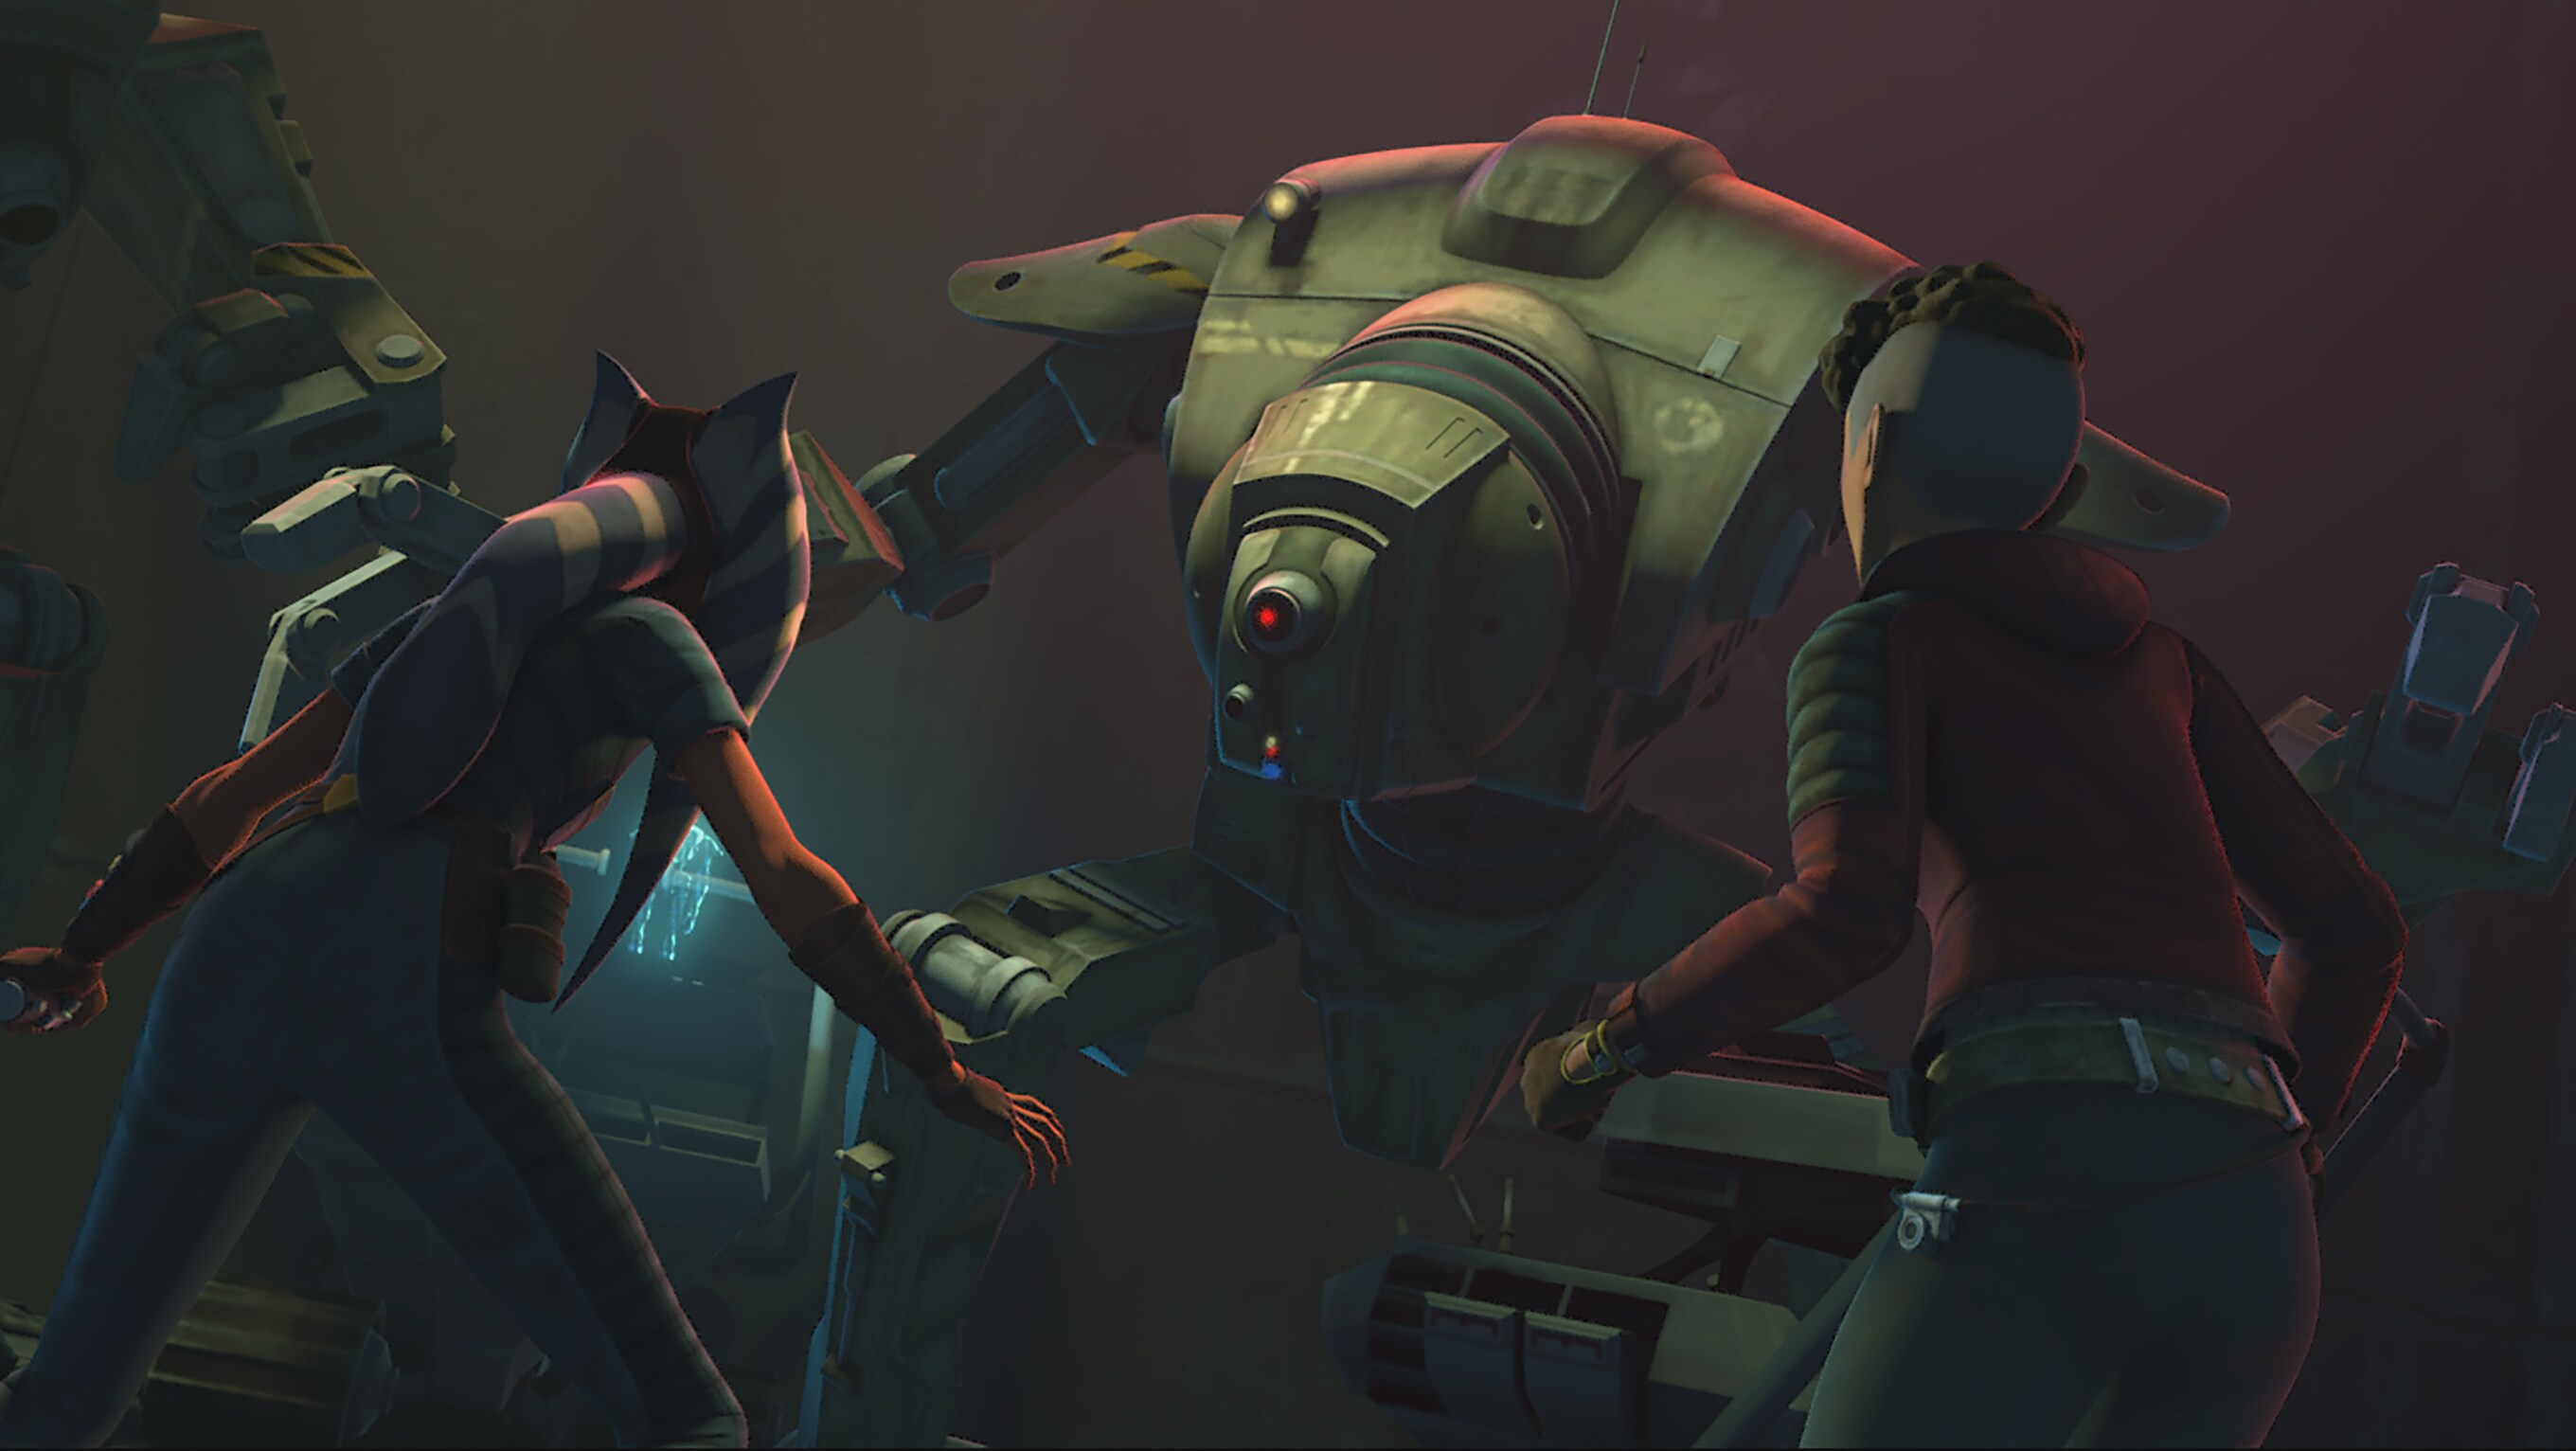 Ahsoka Tano and Trace Martez work together to disable a dangerous droid in STAR WARS: THE CLONE WARS, exclusively on Disney+.